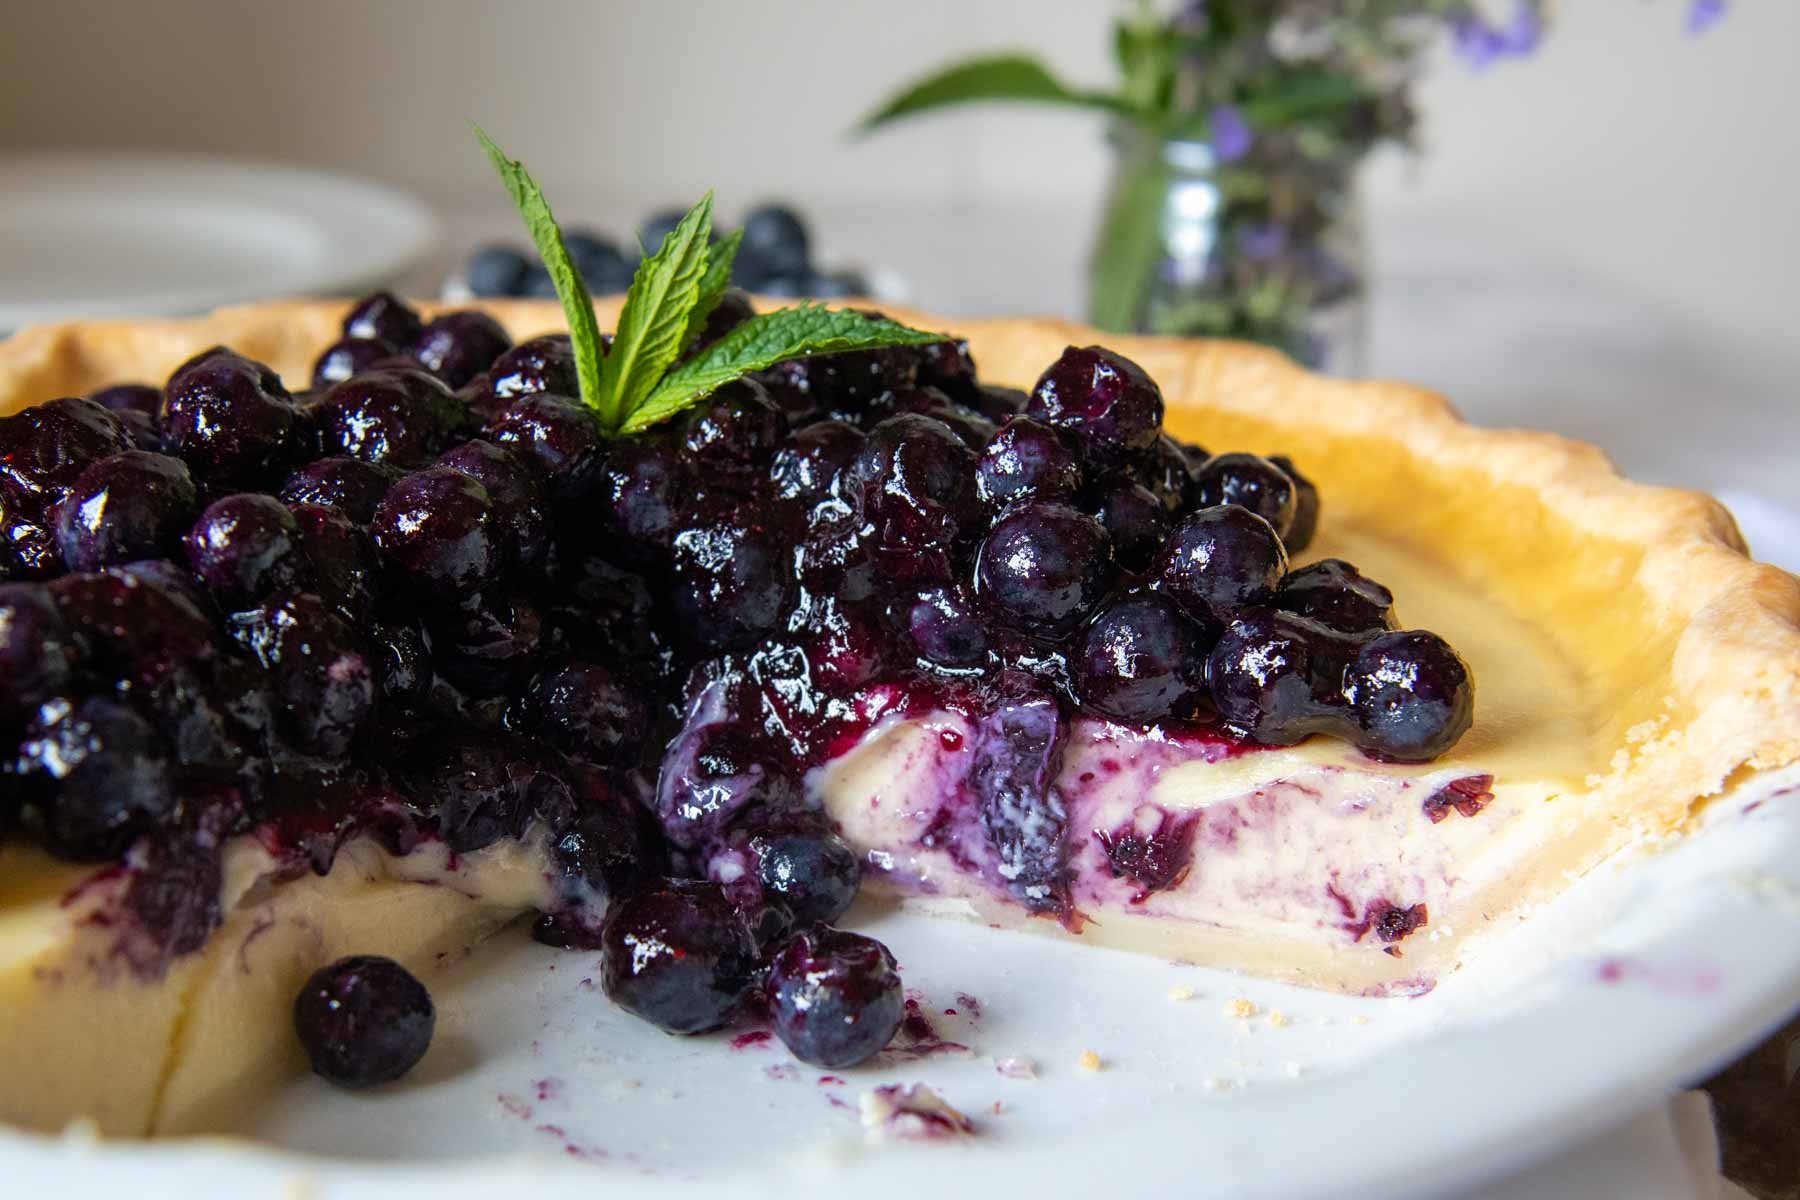 a pie with blueberry topping and slice taken out.